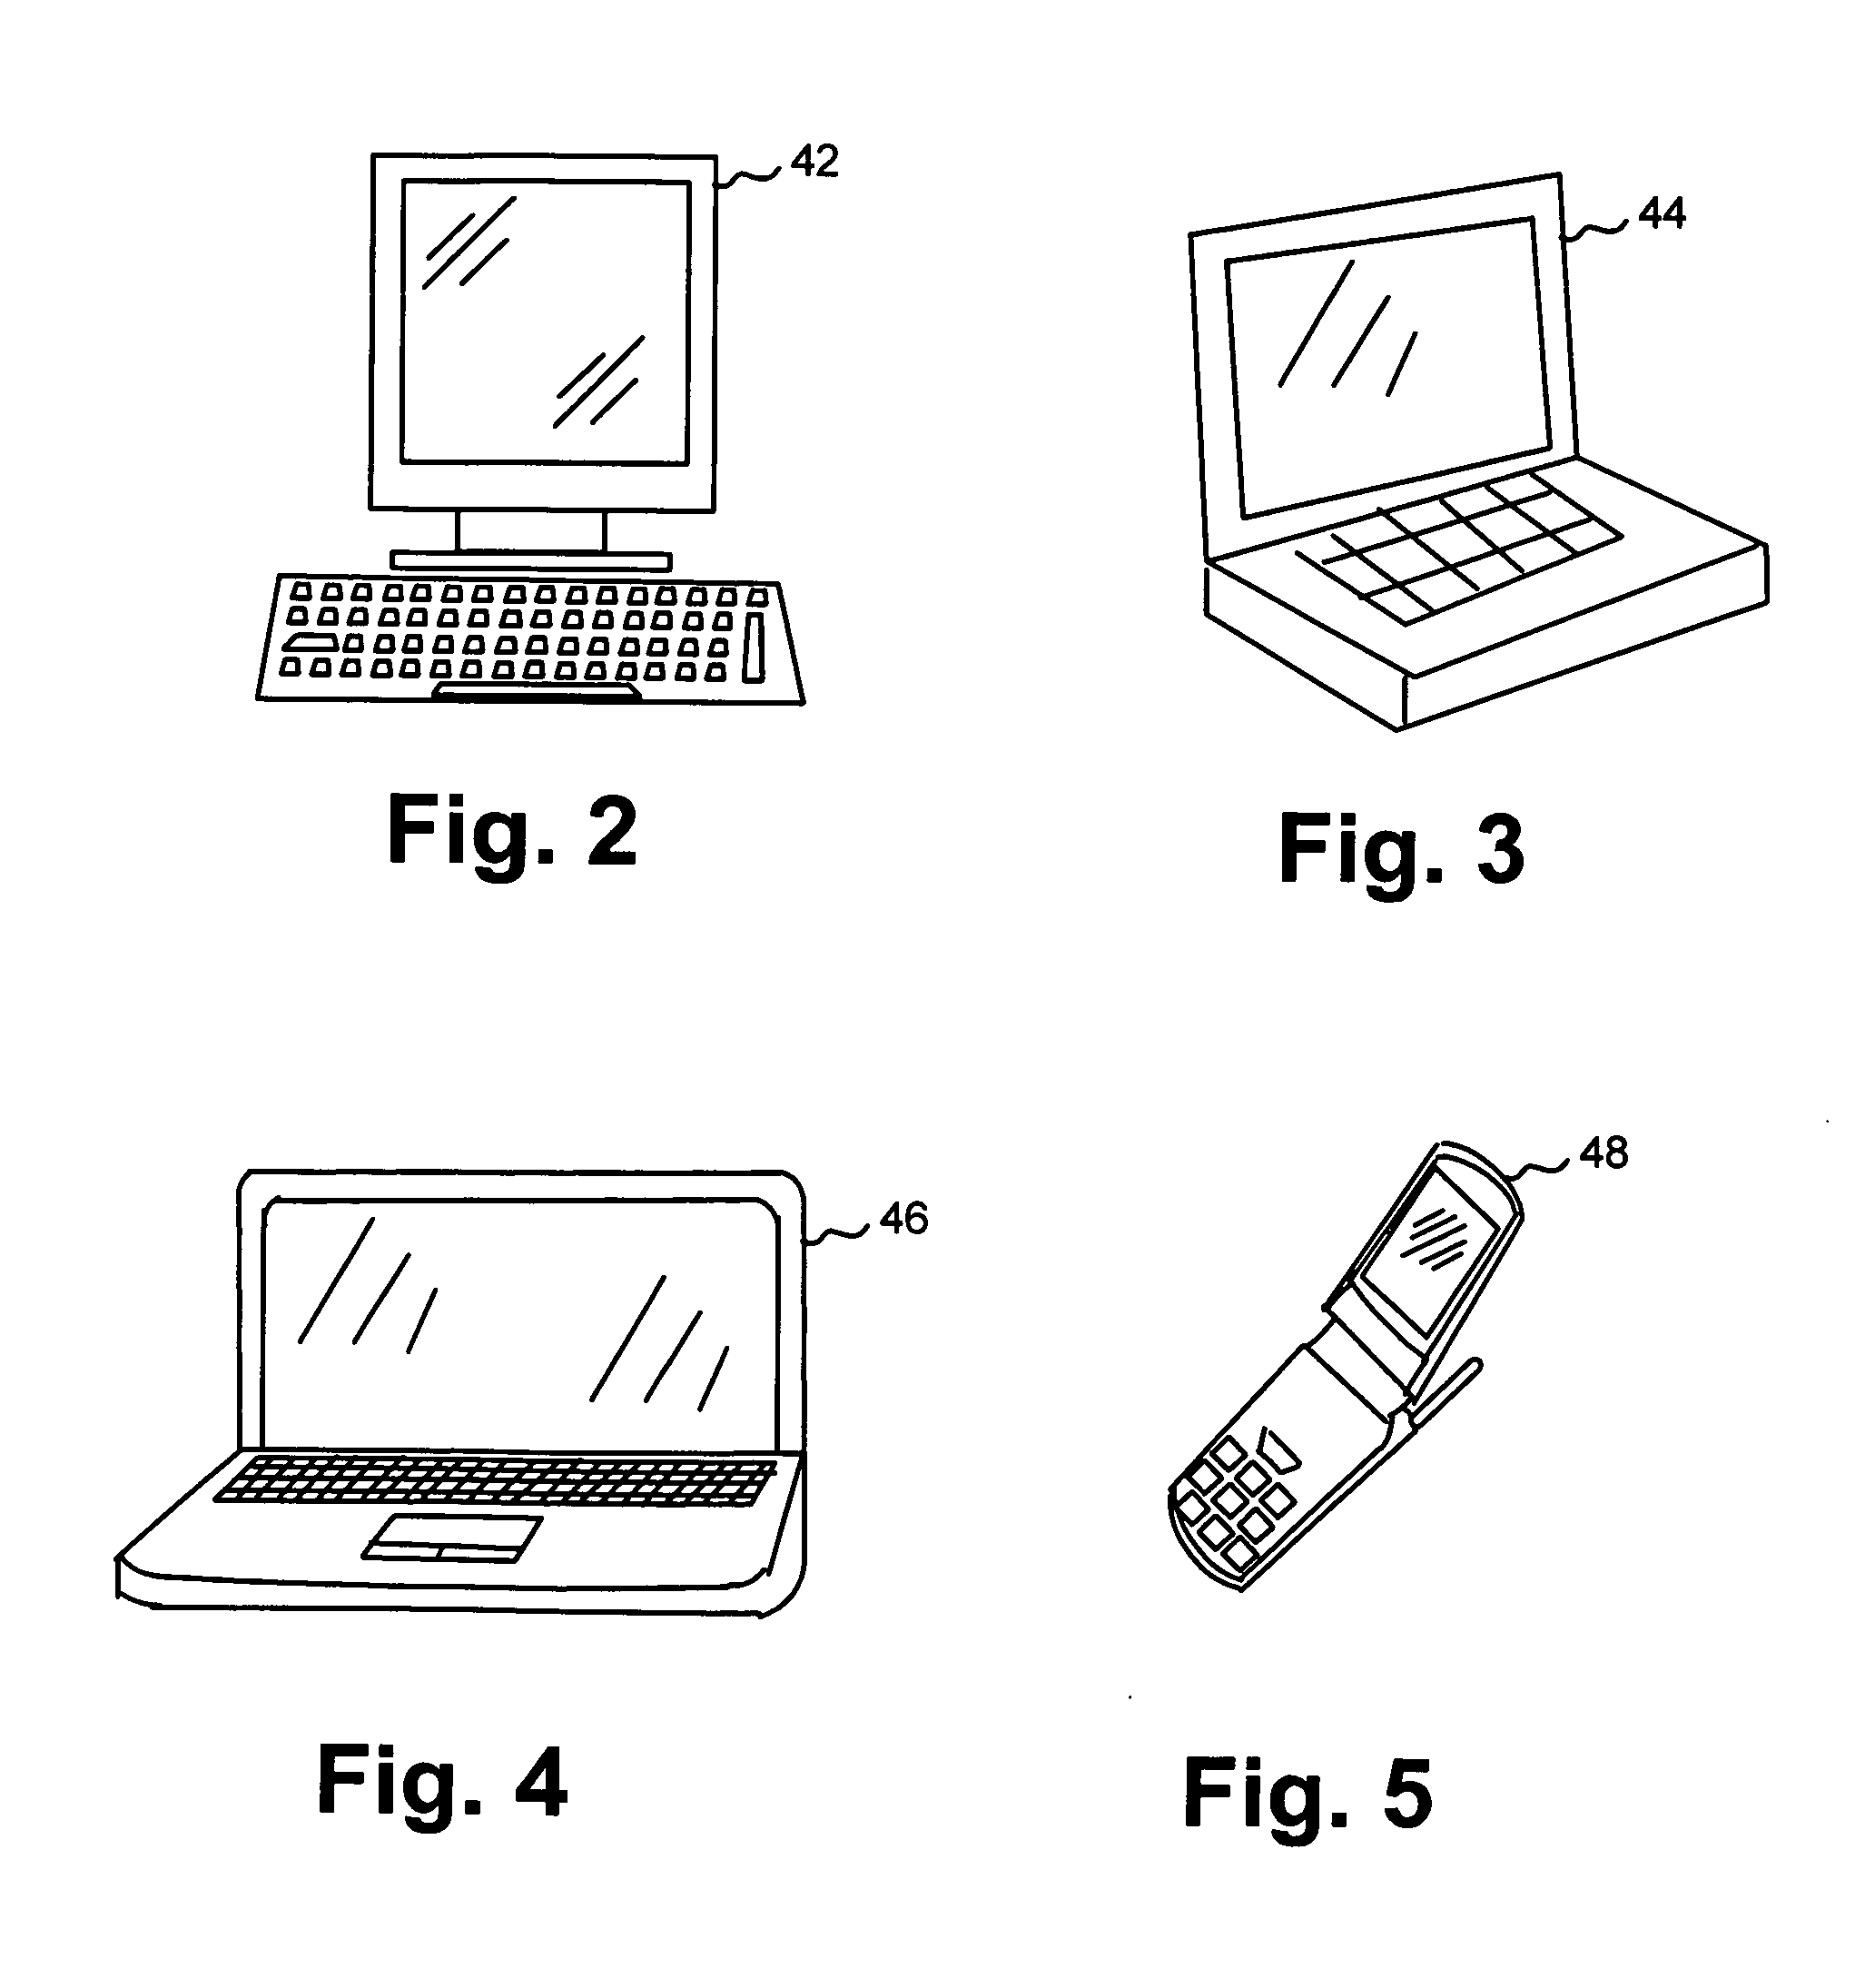 Smart card system for managing venue access and venue attendee rewards, and method of assembling the smart card system